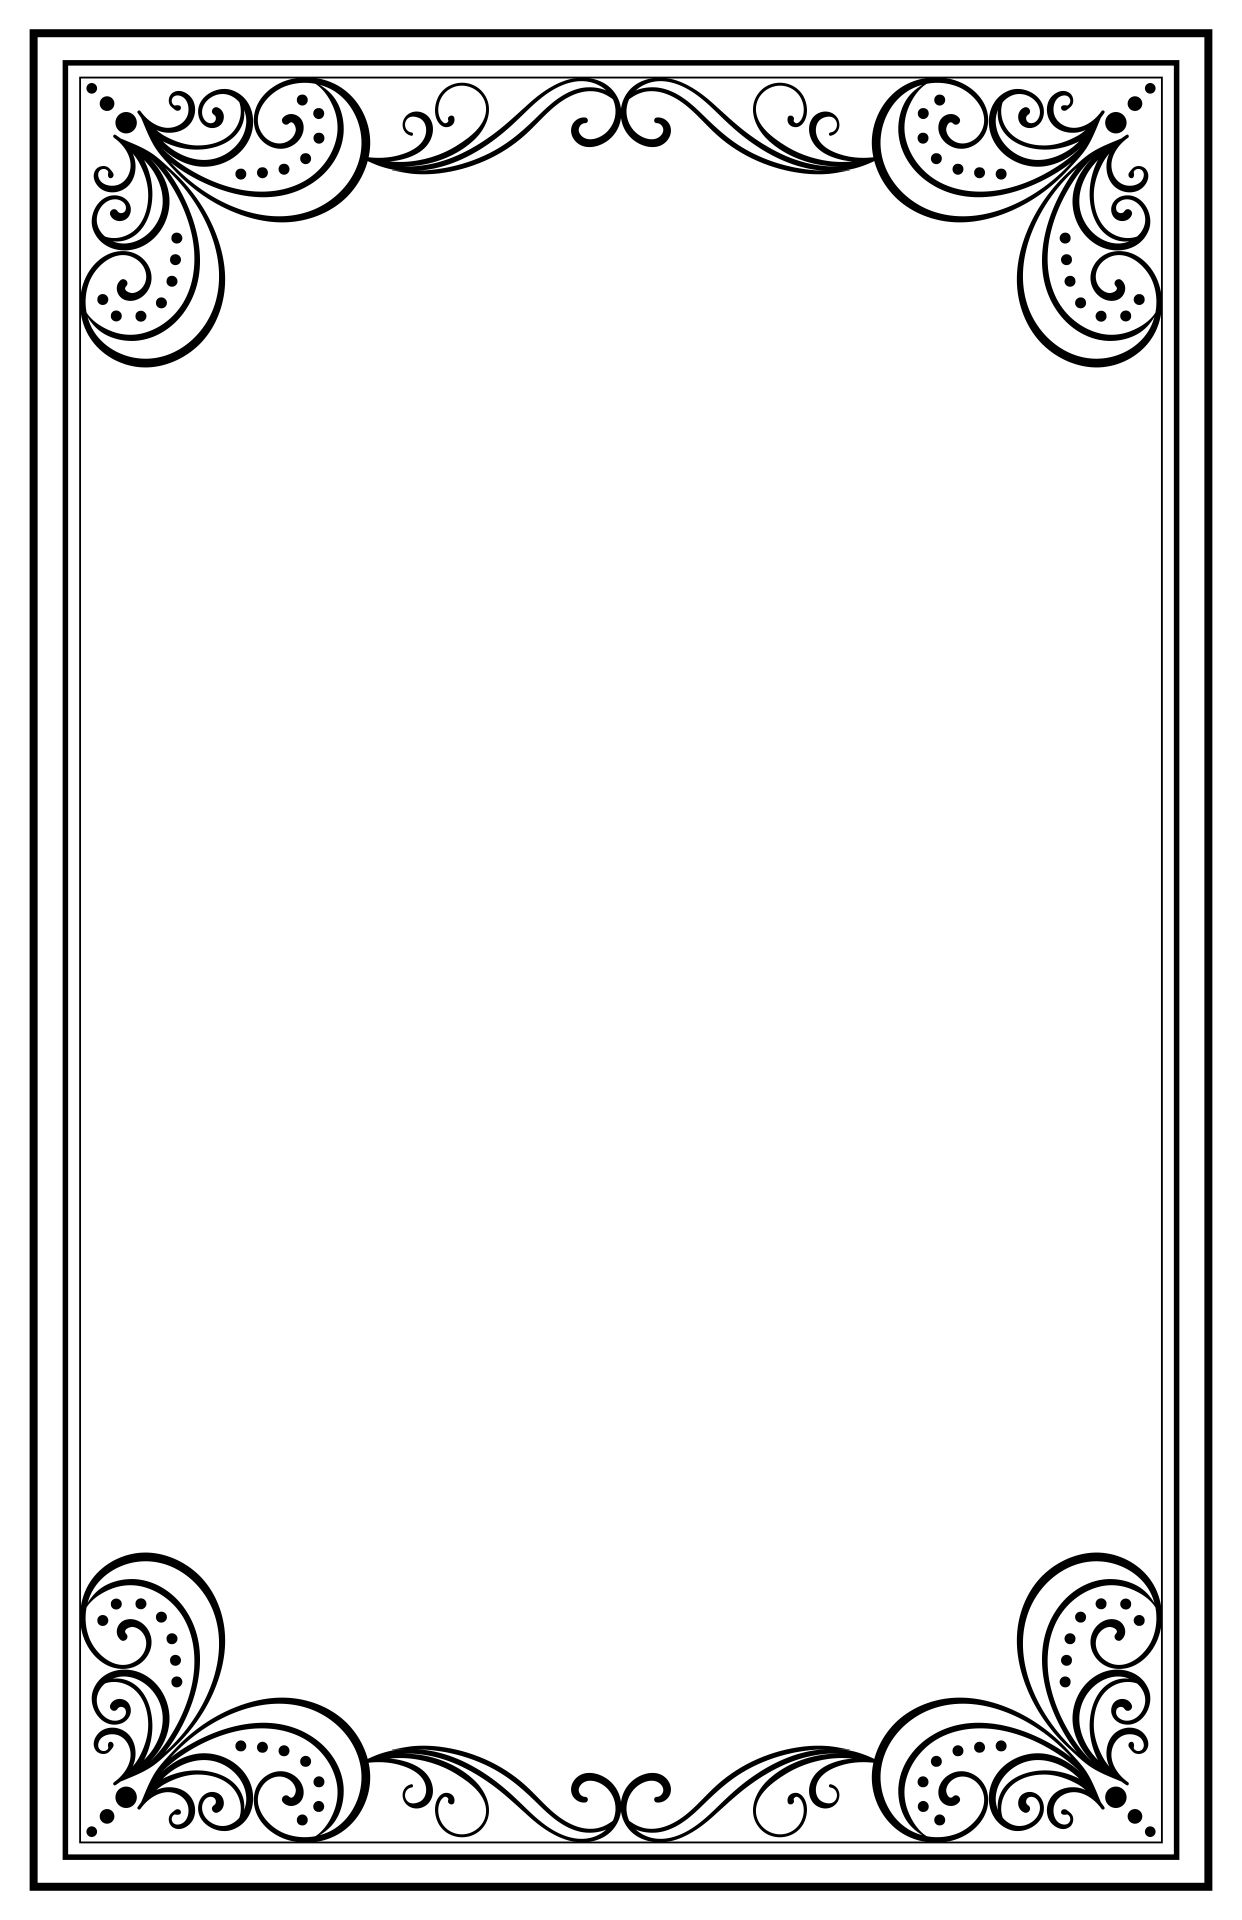 Free Printable Picture Frames To Color